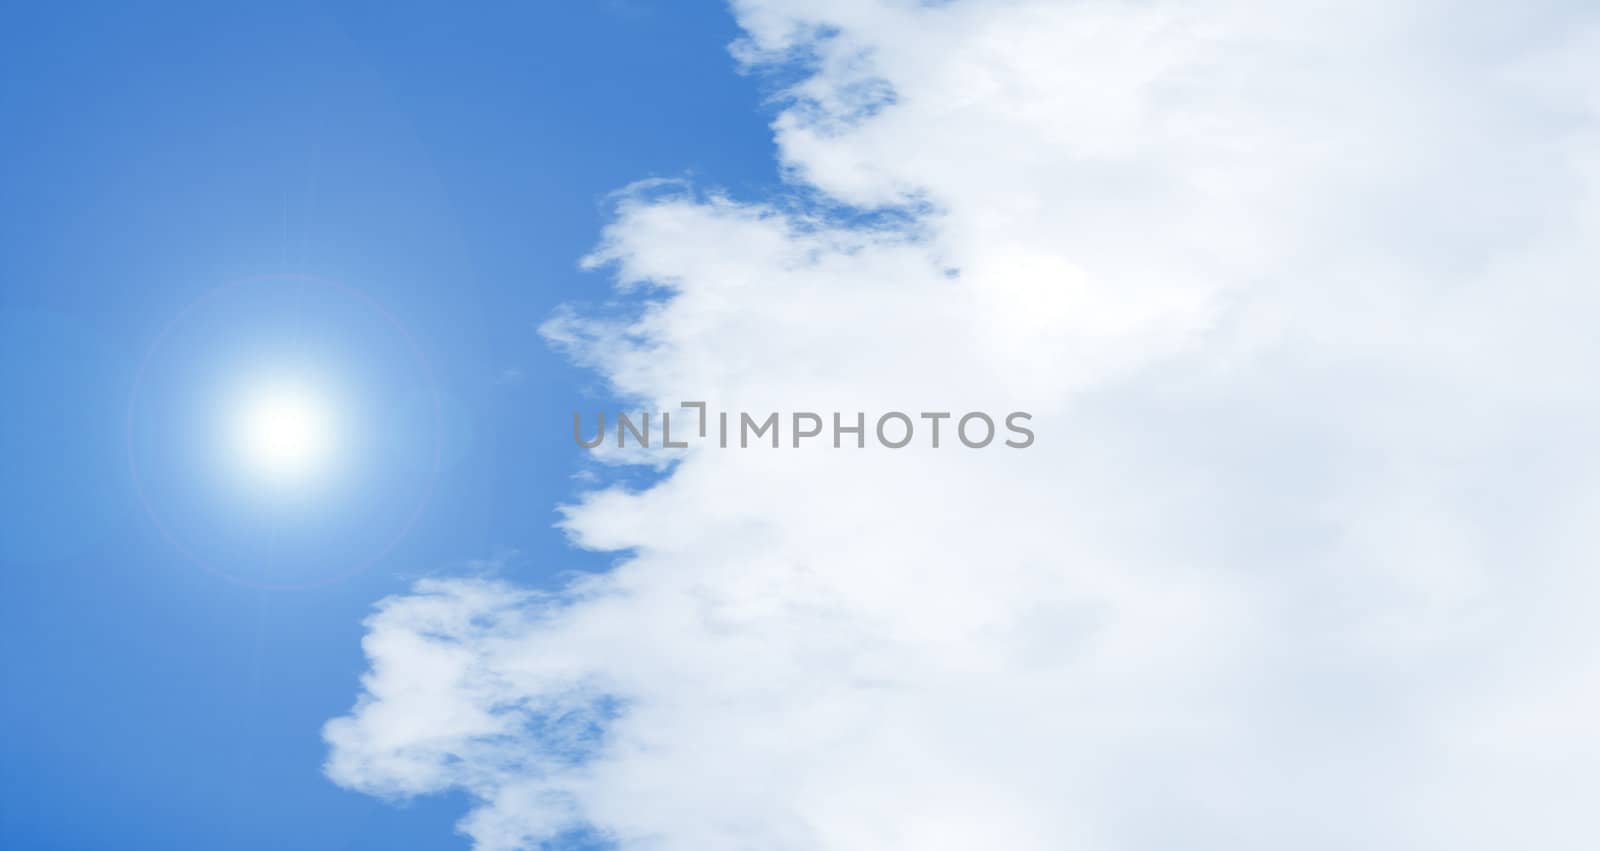 An image of a blue sky background